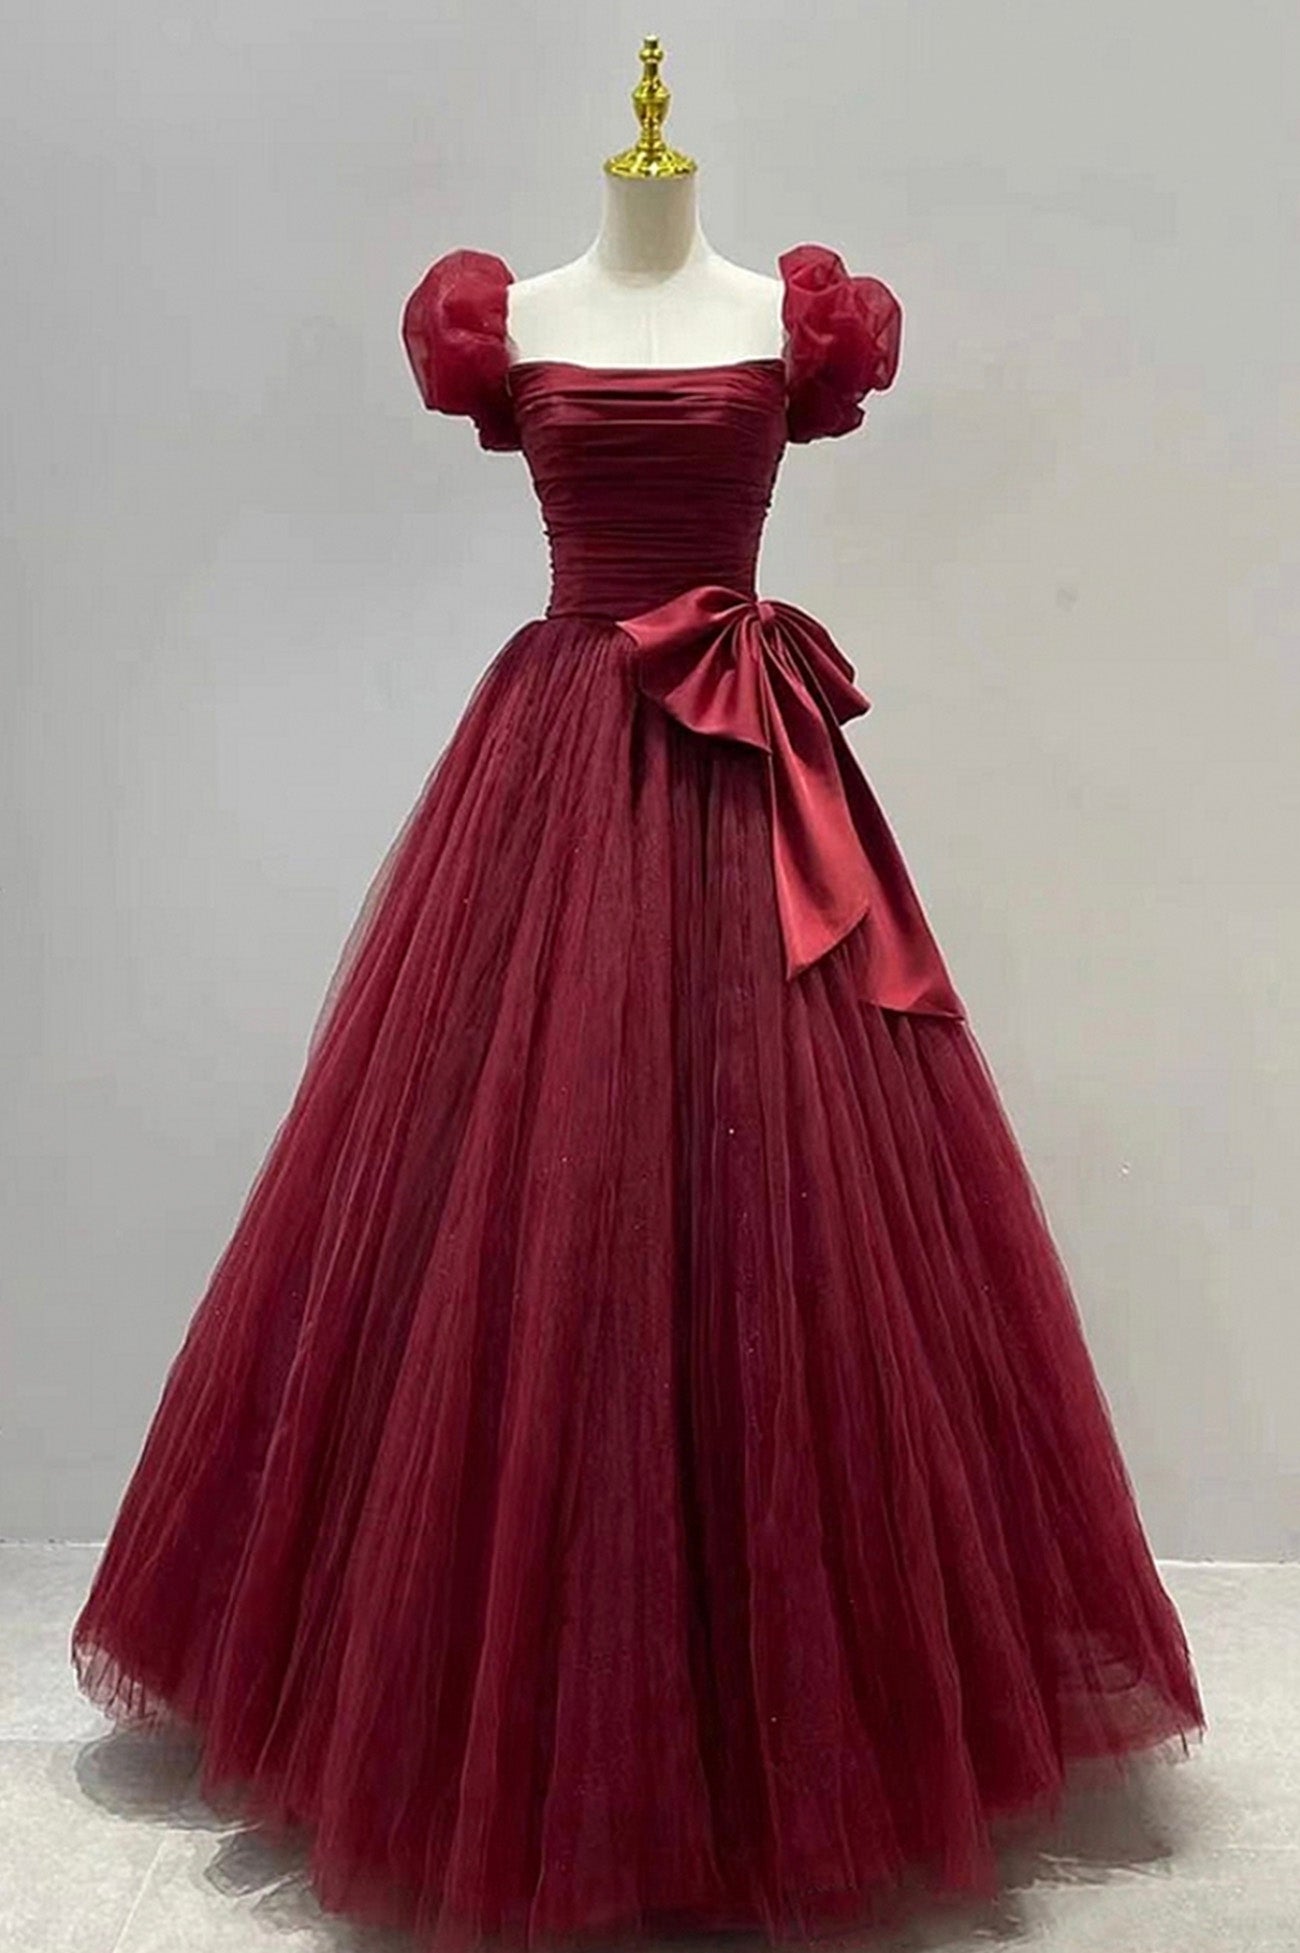 Party Dresses Size 32, Burgundy Tulle Short Sleeve A-Line Formal Dresses, Burgundy Evening Dresses